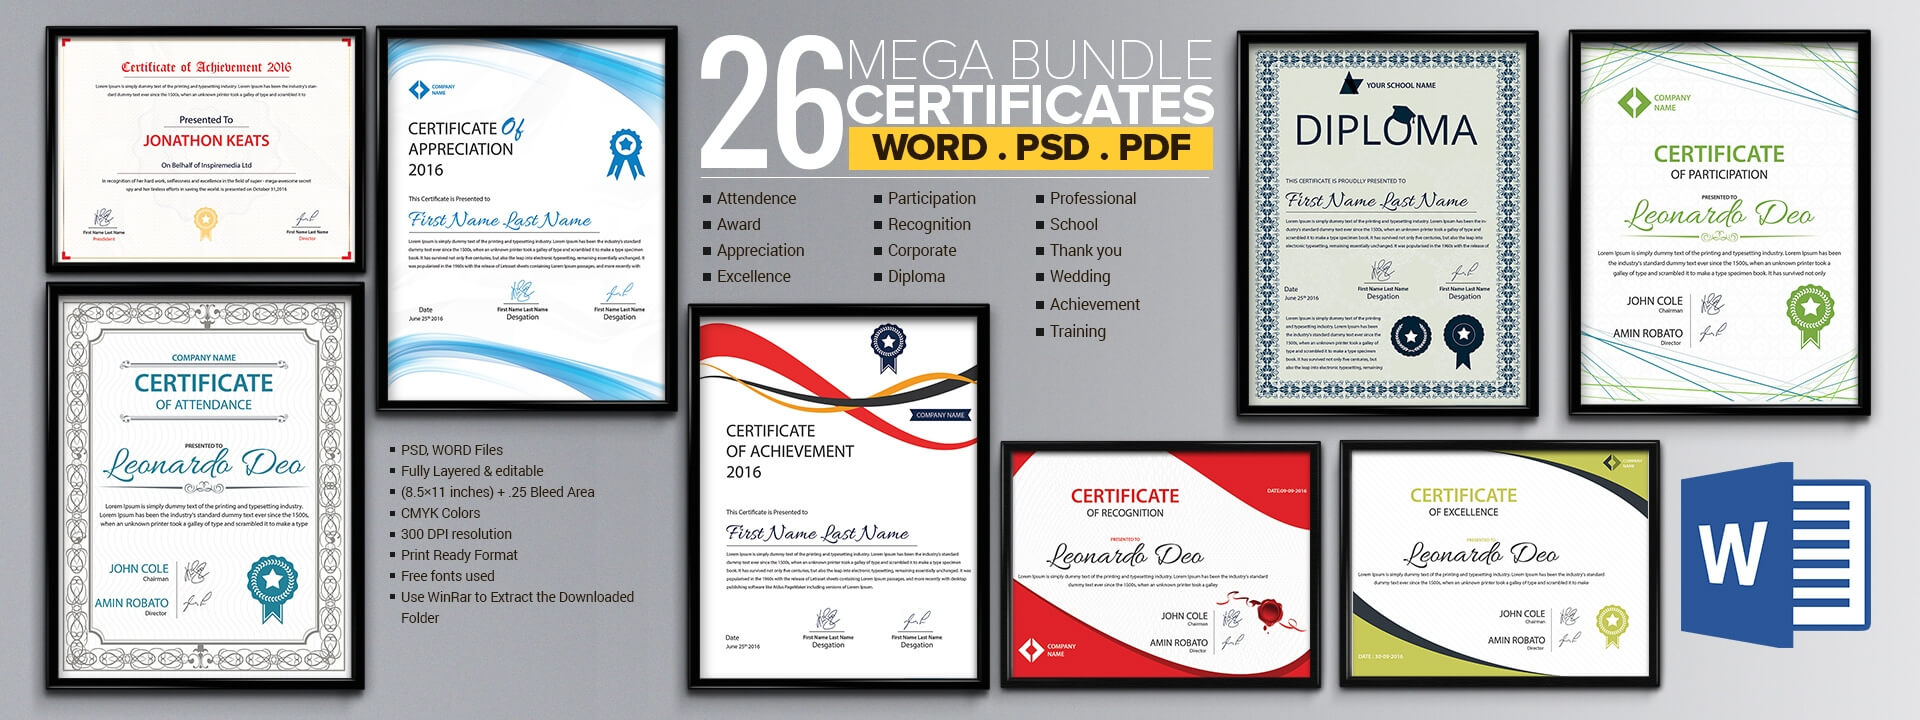 Word Certificate Template - 53+ Free Download Samples Regarding Free Certificate Templates For Word 2007